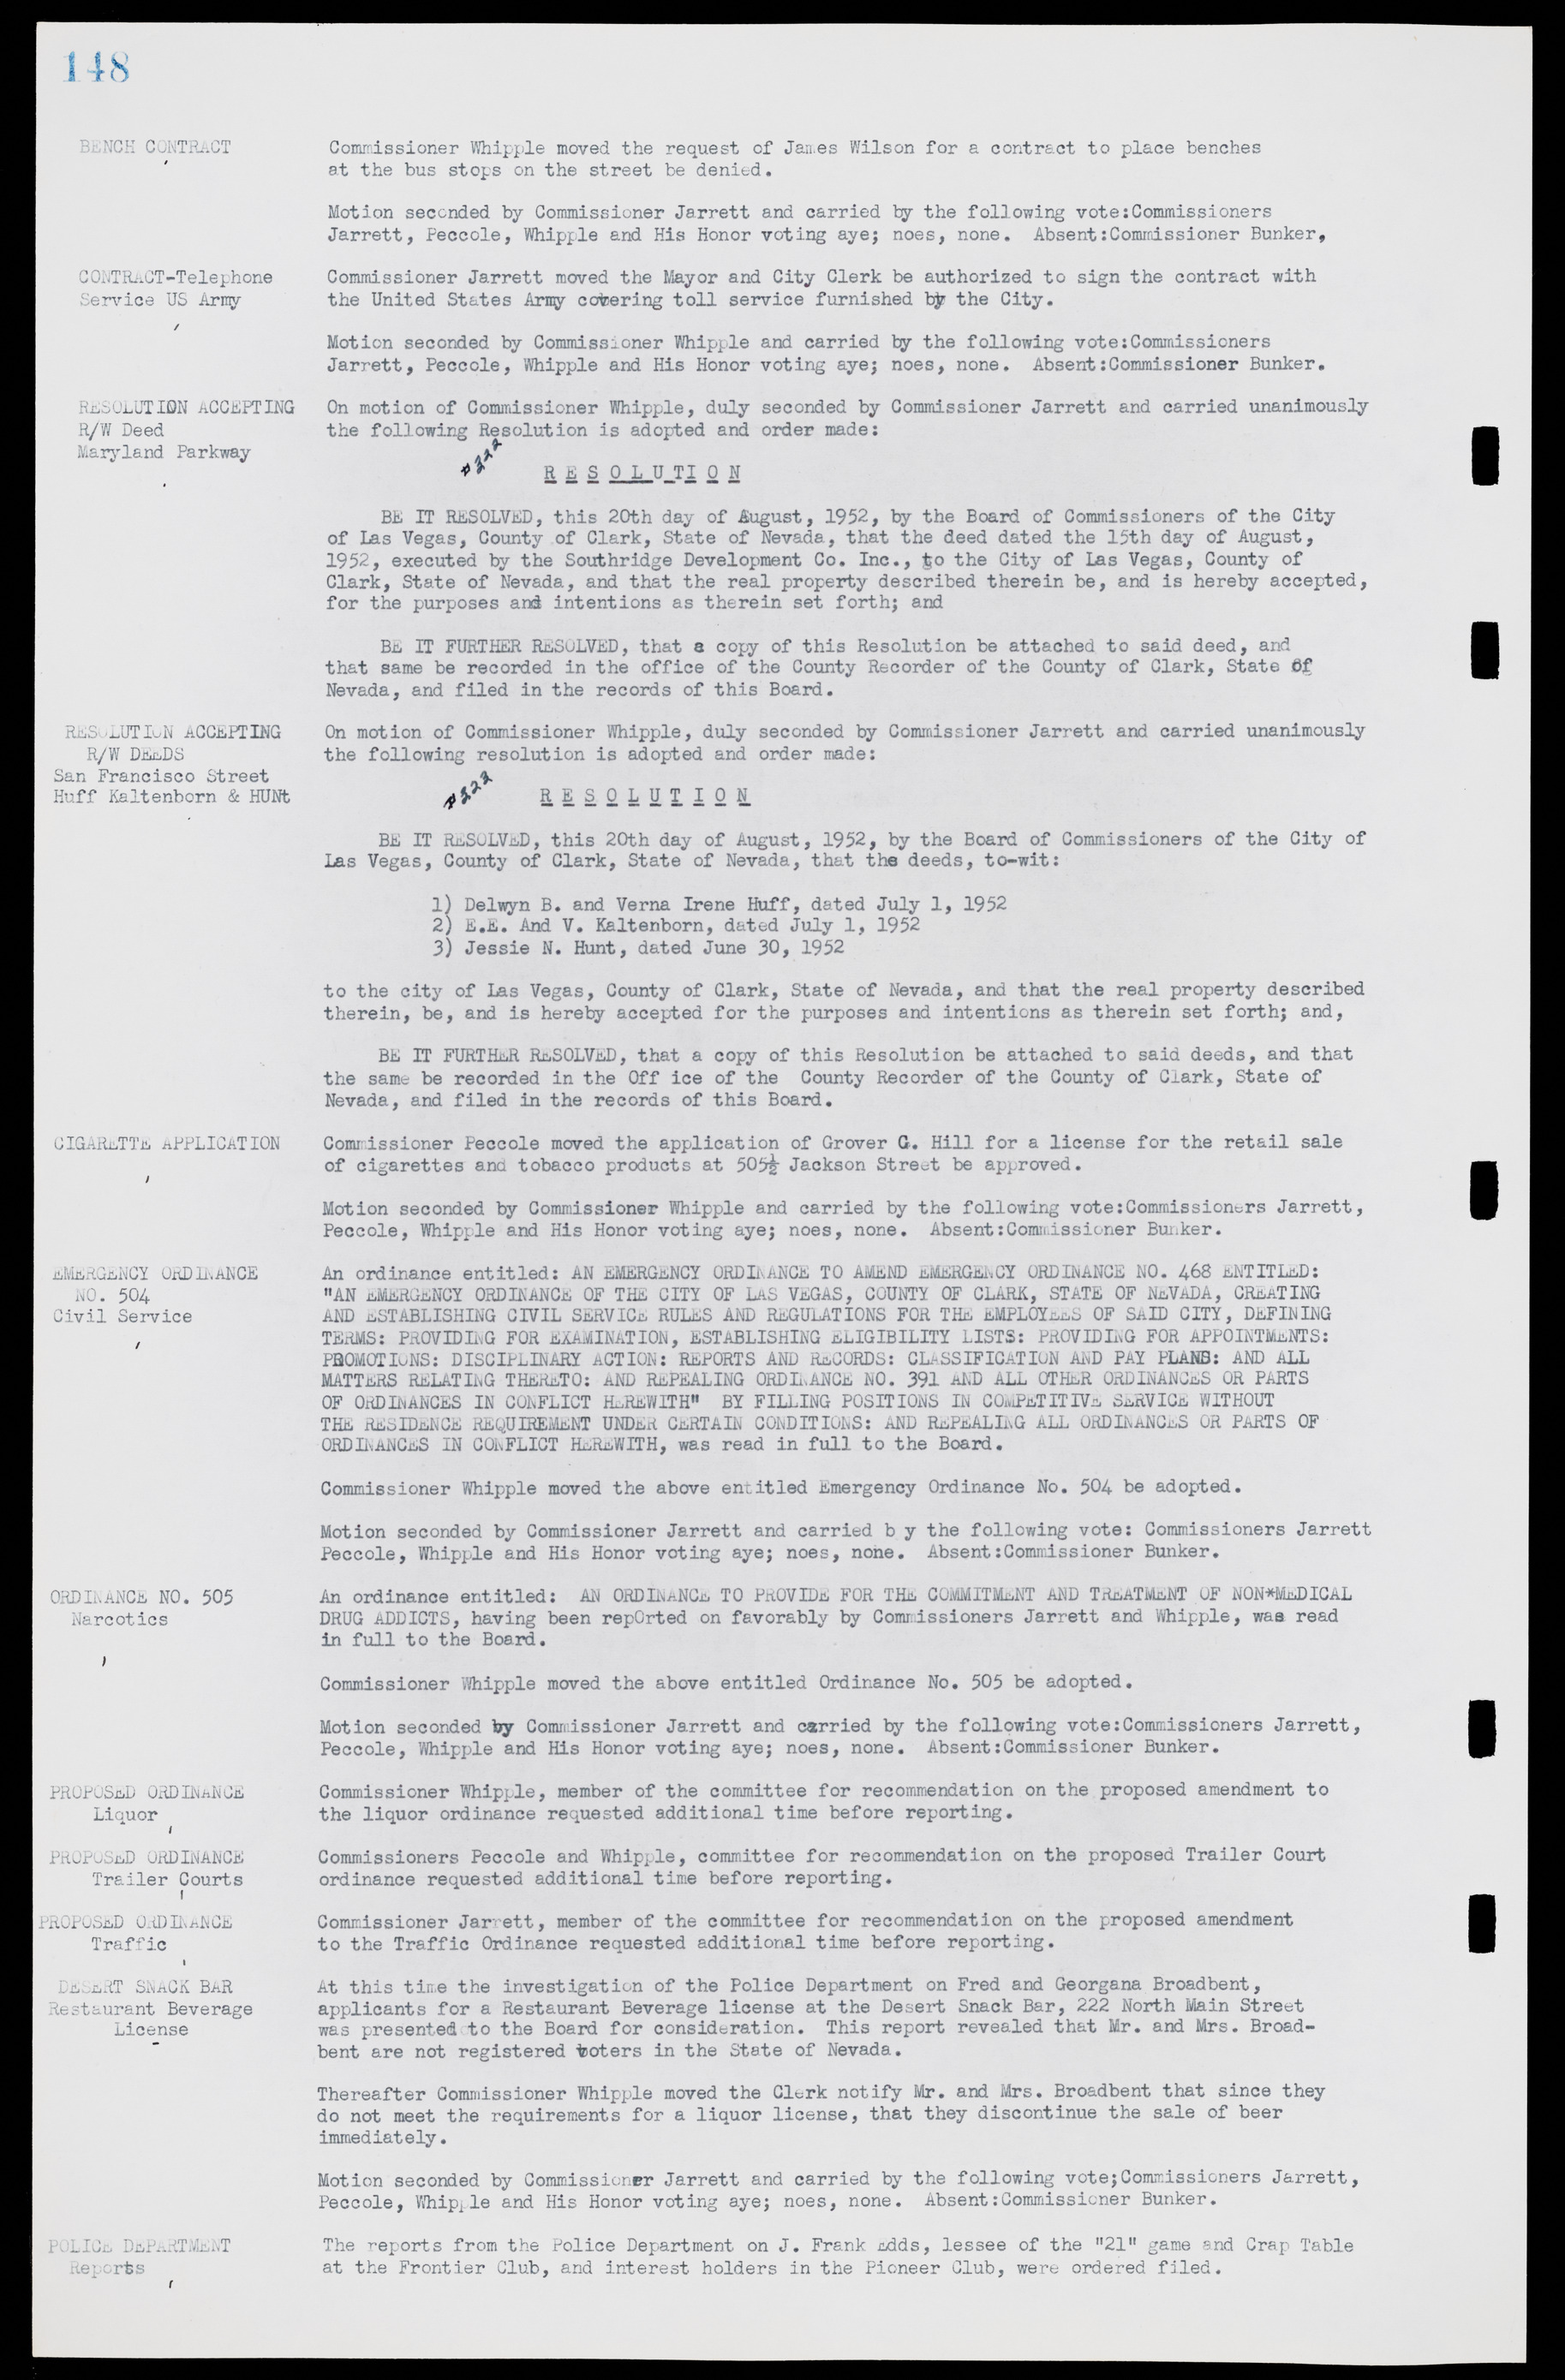 Las Vegas City Commission Minutes, May 26, 1952 to February 17, 1954, lvc000008-162